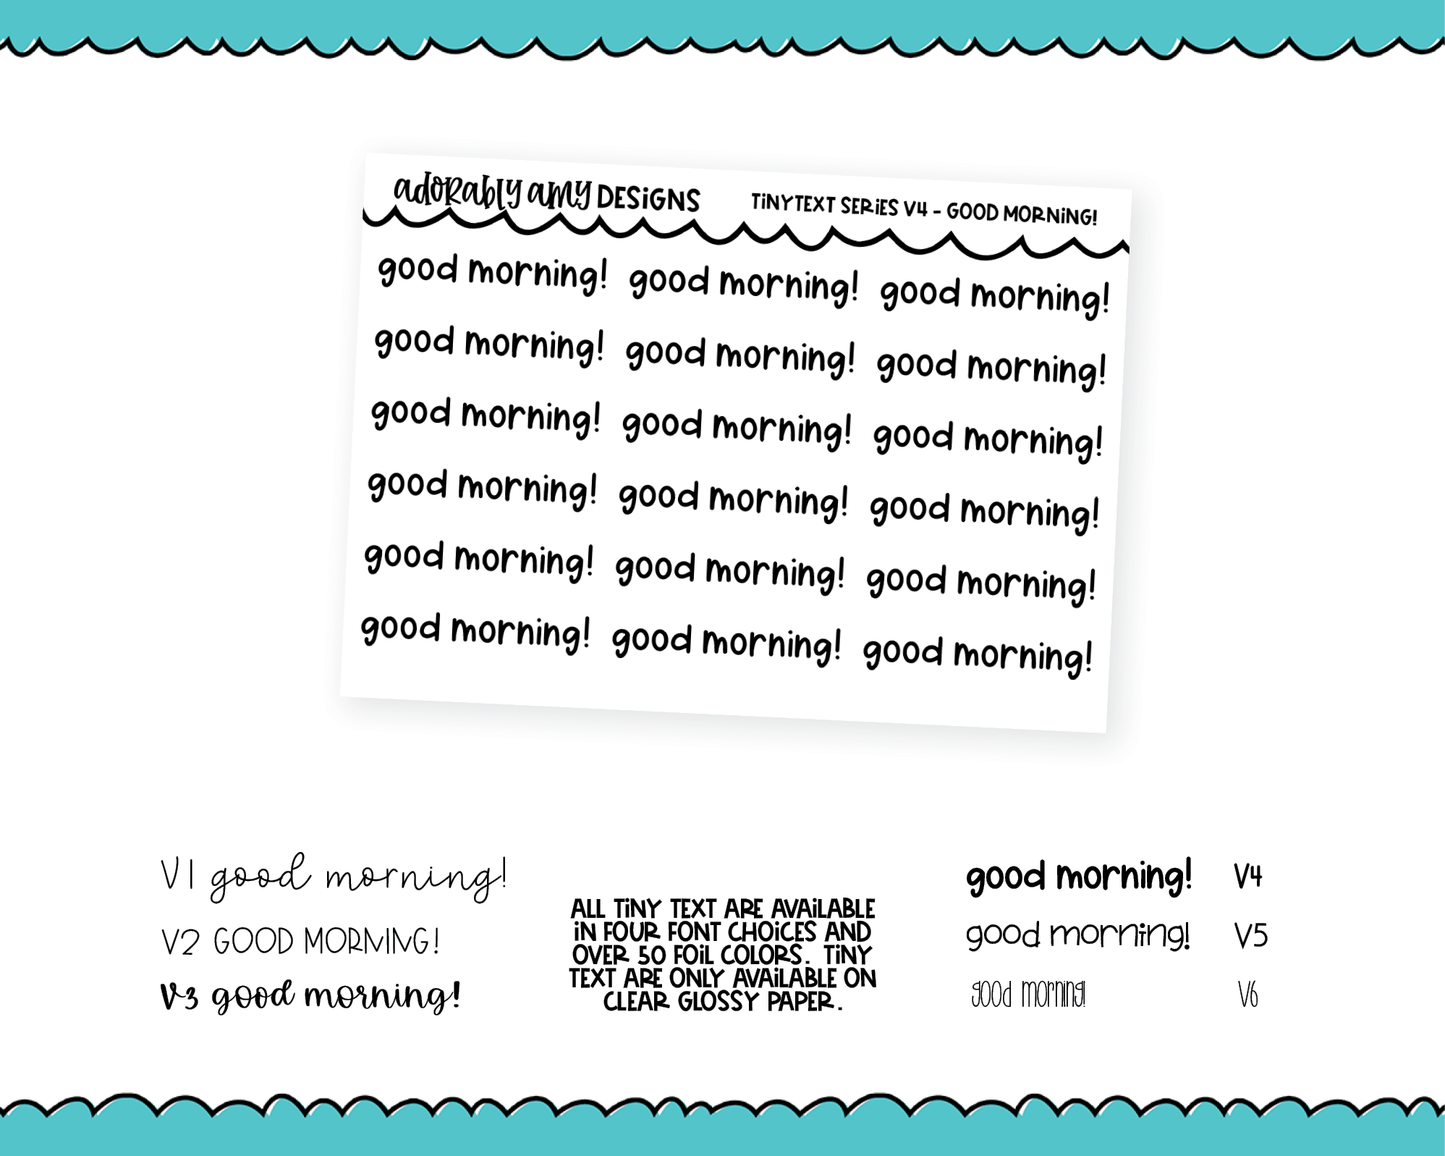 Foiled Tiny Text Series - Good Morning Checklist Size Planner Stickers for any Planner or Insert